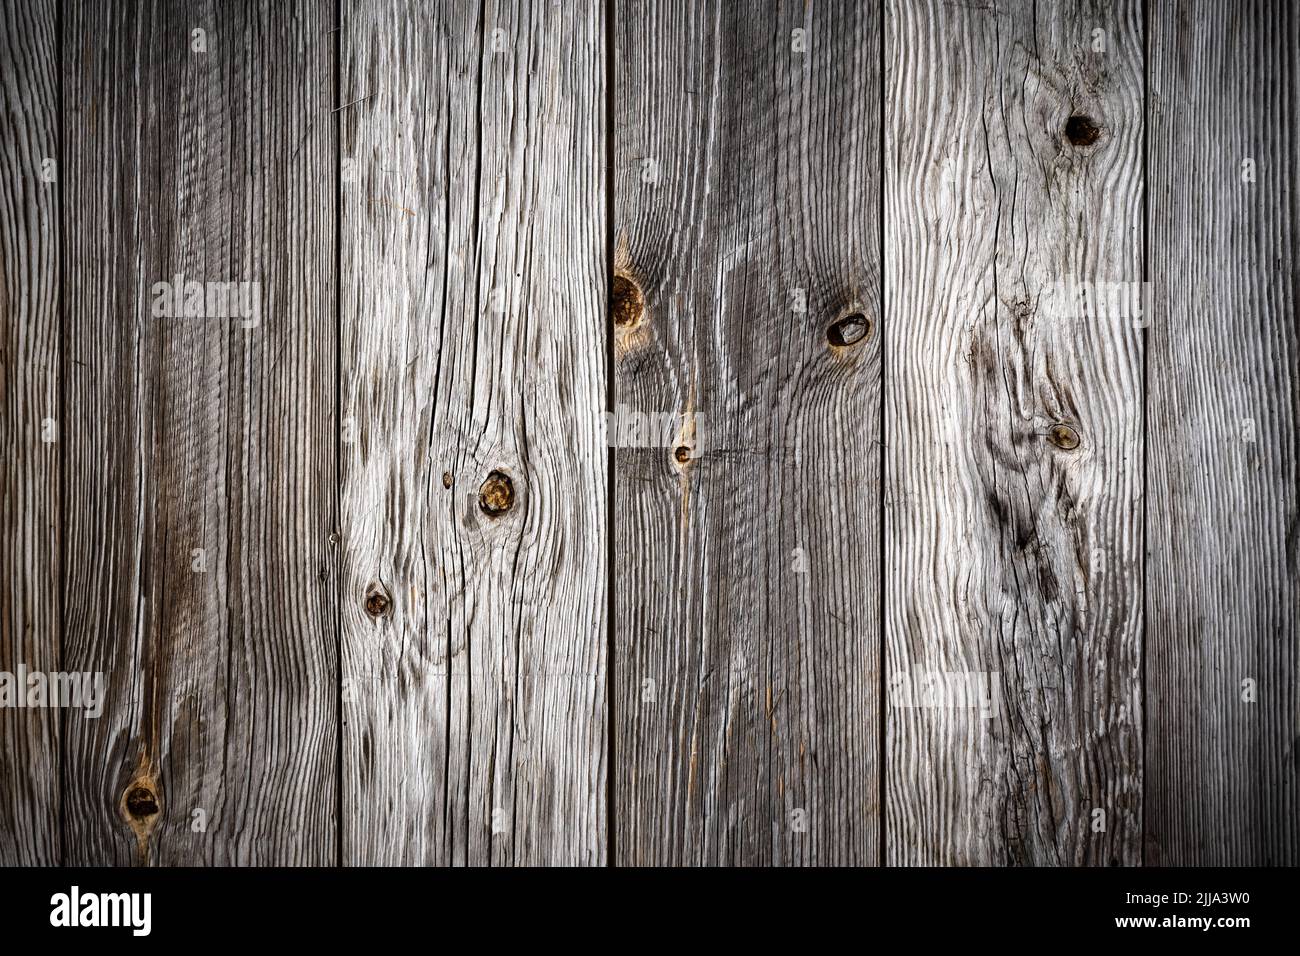 Old wooden grunge board. Natural texture. Can be used like nature background Stock Photo